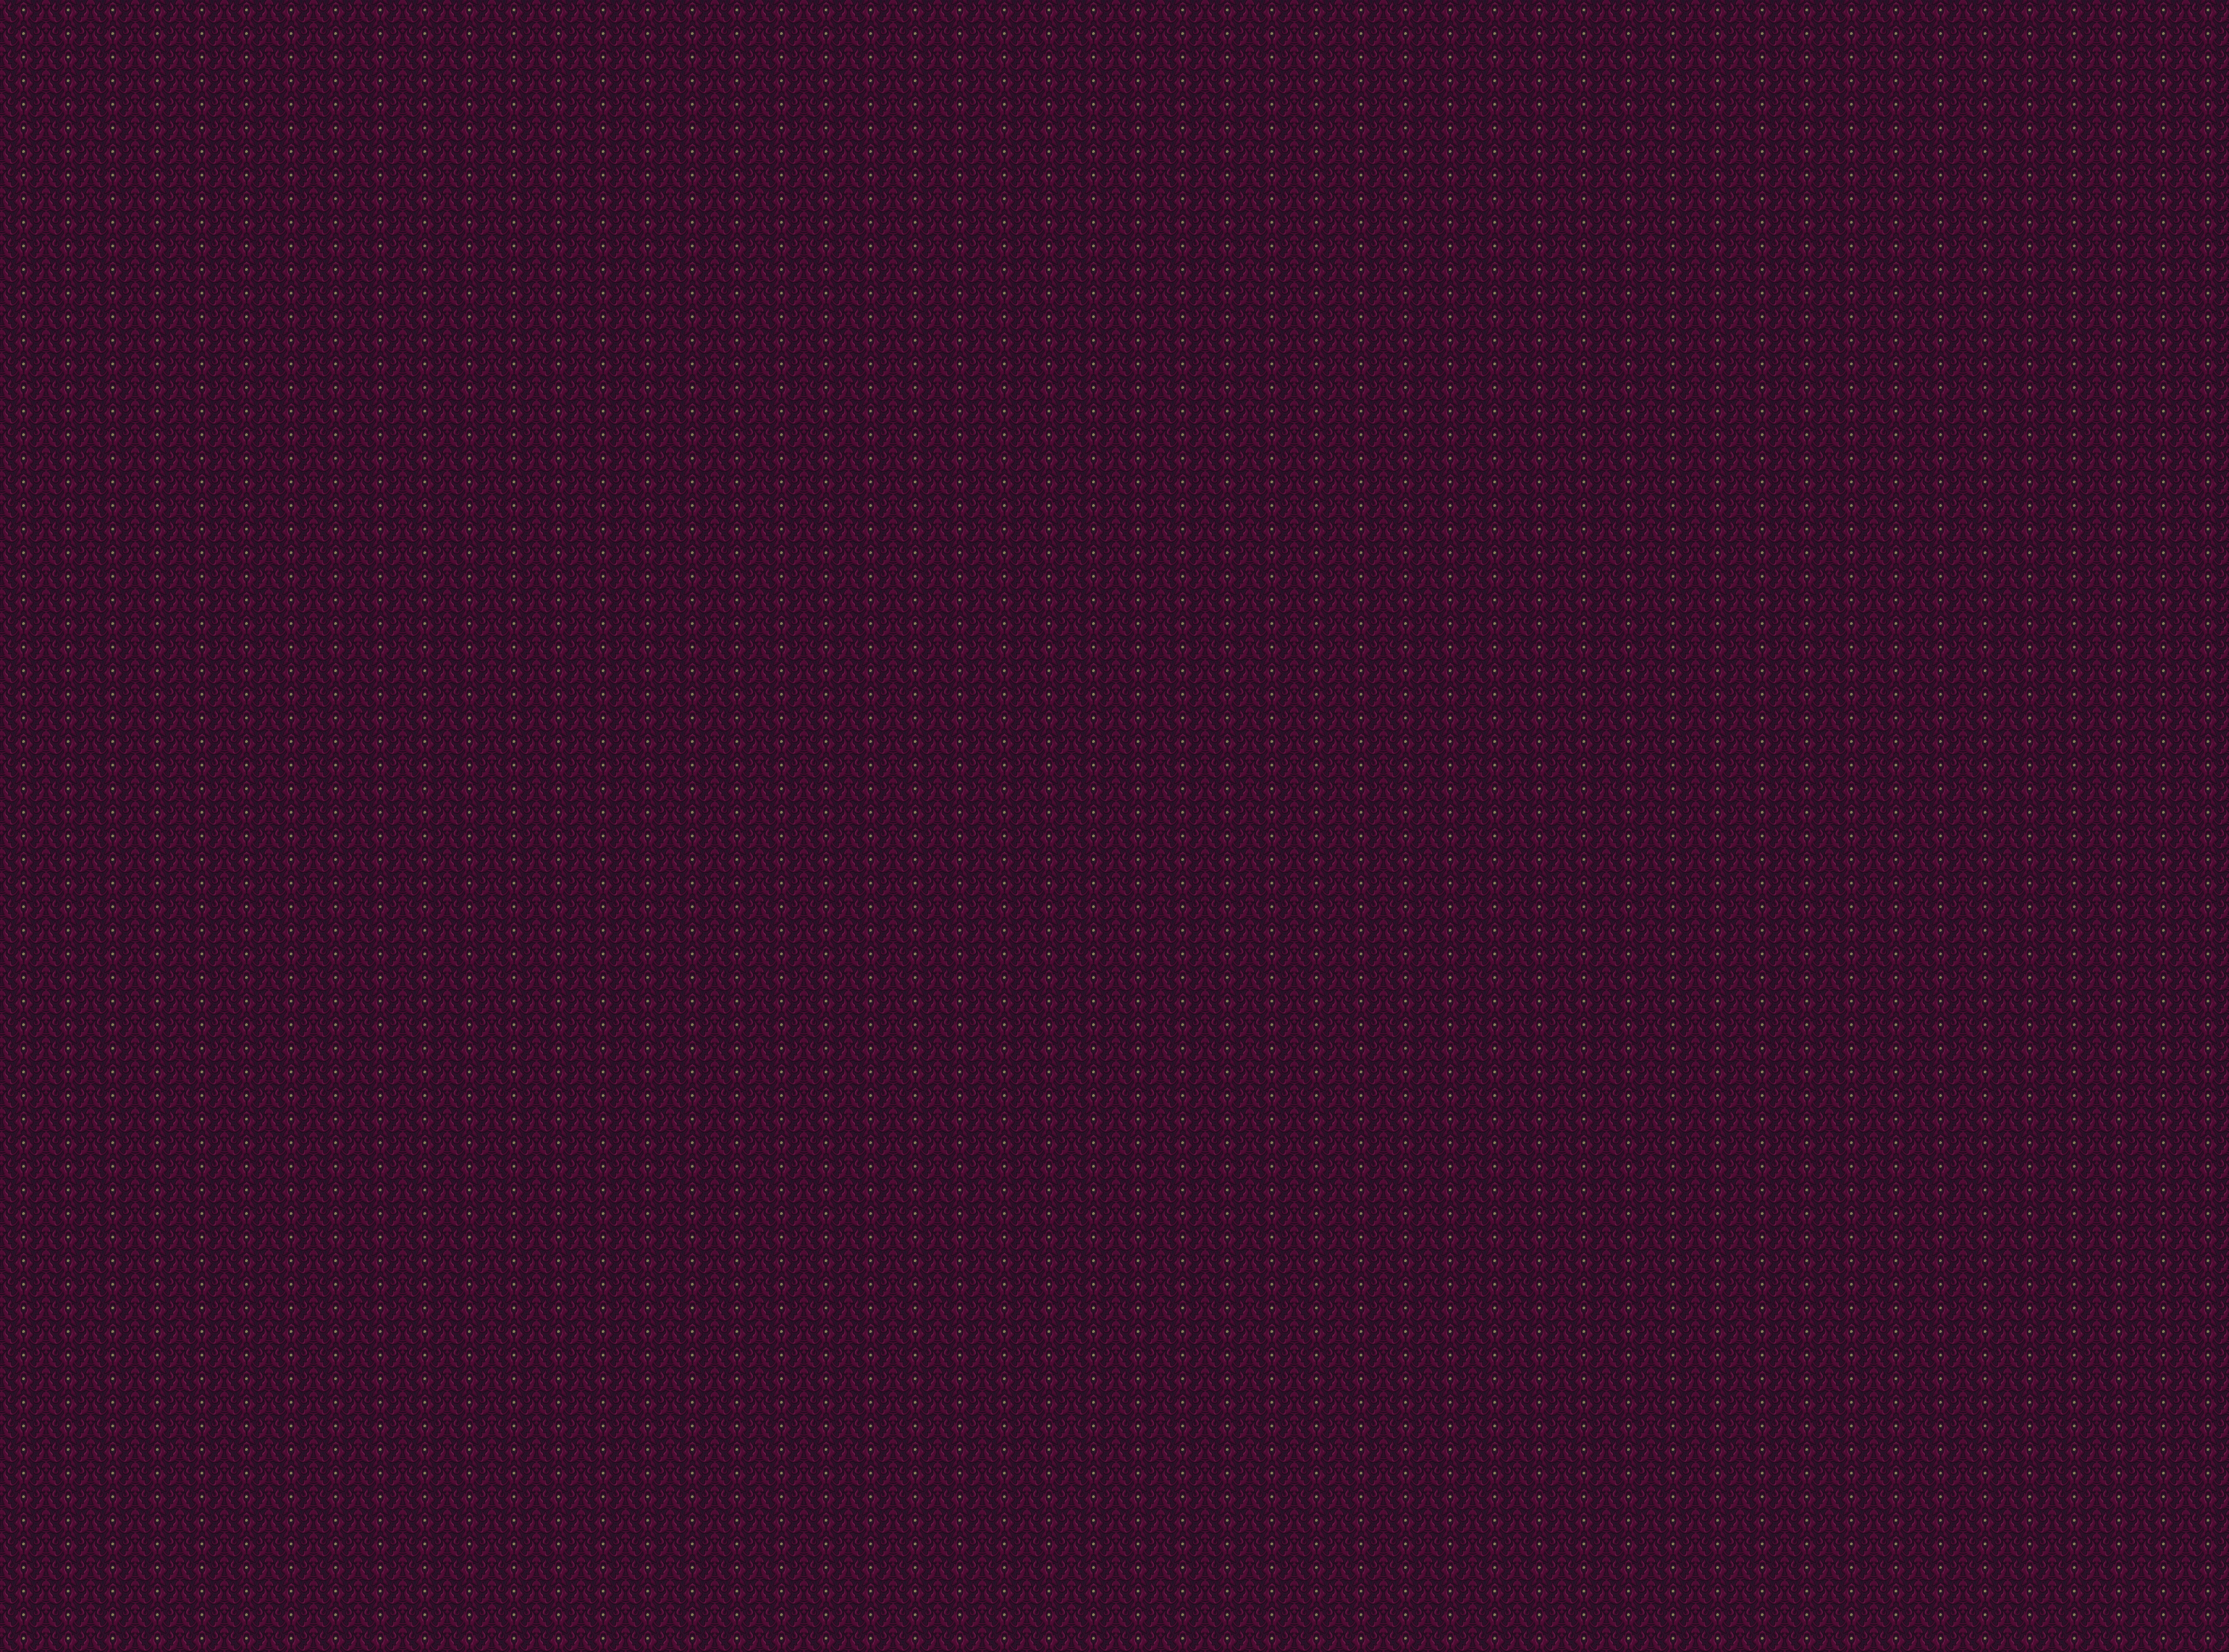 Graphical Interior Seamless Patterns Amp Background